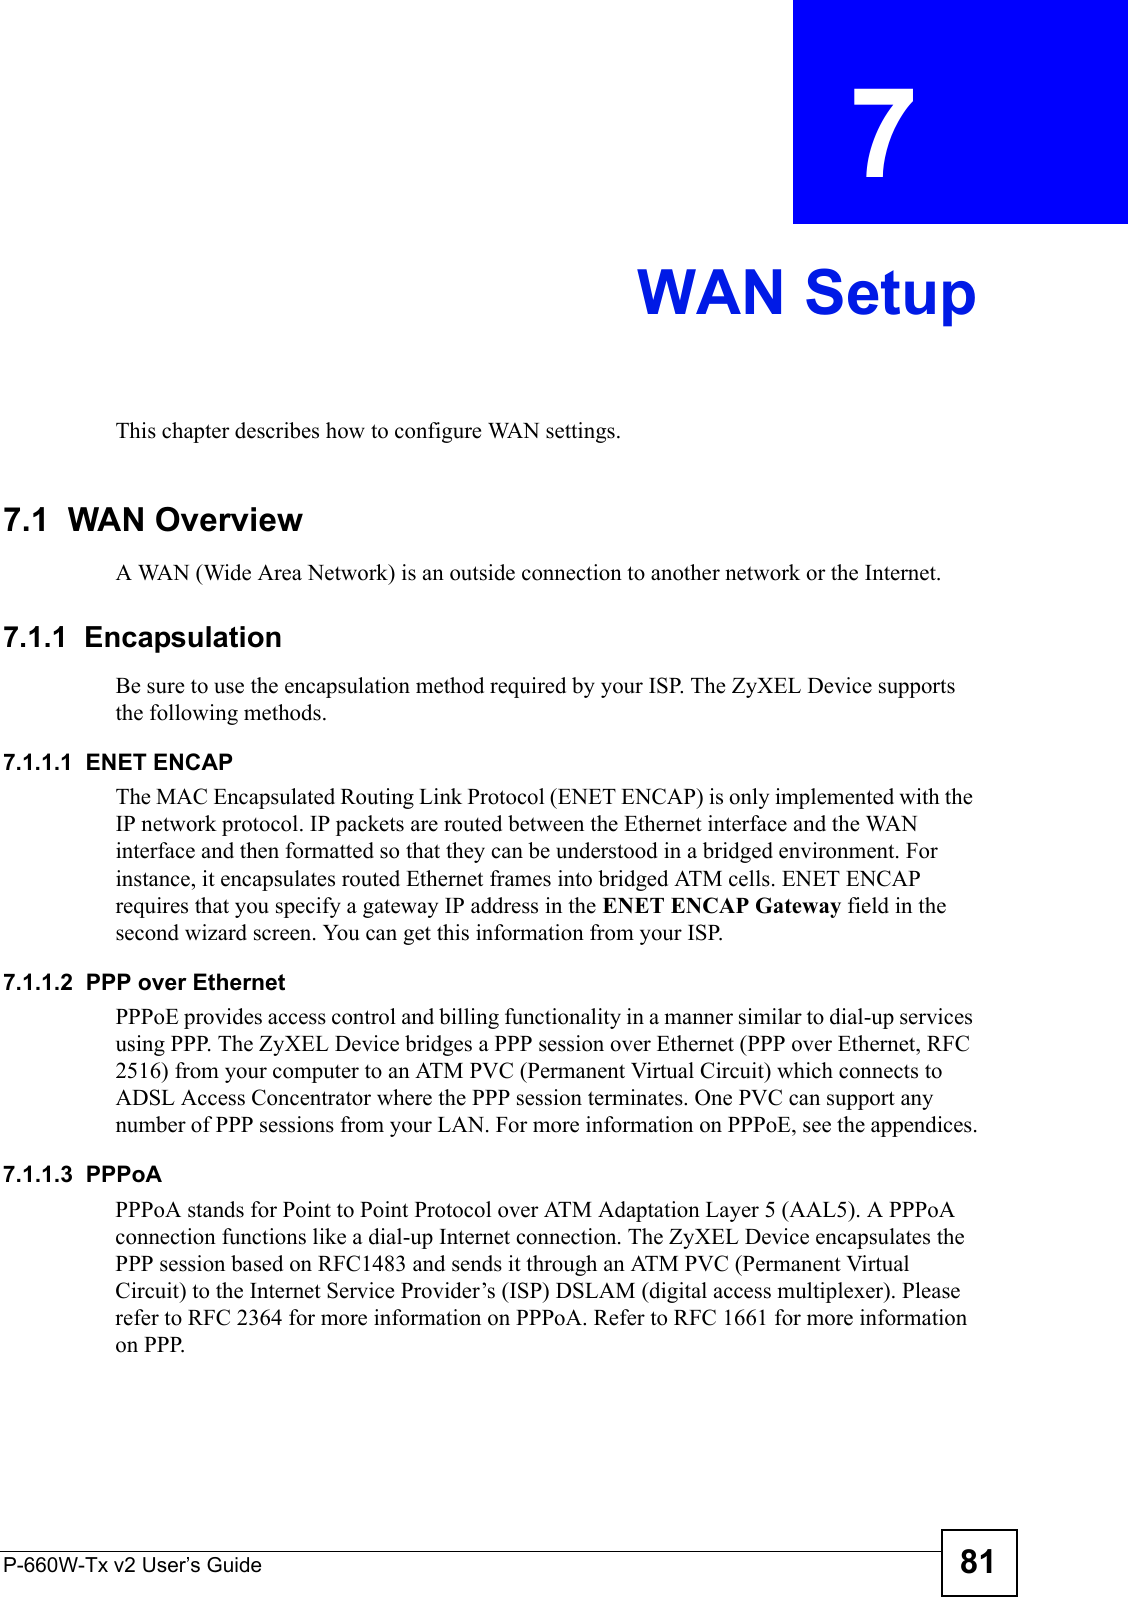 P-660W-Tx v2 User’s Guide 81CHAPTER  7 WAN SetupThis chapter describes how to configure WAN settings.7.1  WAN Overview A WAN (Wide Area Network) is an outside connection to another network or the Internet.7.1.1  EncapsulationBe sure to use the encapsulation method required by your ISP. The ZyXEL Device supports the following methods.7.1.1.1  ENET ENCAPThe MAC Encapsulated Routing Link Protocol (ENET ENCAP) is only implemented with the IP network protocol. IP packets are routed between the Ethernet interface and the WAN interface and then formatted so that they can be understood in a bridged environment. For instance, it encapsulates routed Ethernet frames into bridged ATM cells. ENET ENCAP requires that you specify a gateway IP address in the ENET ENCAP Gateway field in the second wizard screen. You can get this information from your ISP.7.1.1.2  PPP over EthernetPPPoE provides access control and billing functionality in a manner similar to dial-up services using PPP. The ZyXEL Device bridges a PPP session over Ethernet (PPP over Ethernet, RFC 2516) from your computer to an ATM PVC (Permanent Virtual Circuit) which connects to ADSL Access Concentrator where the PPP session terminates. One PVC can support any number of PPP sessions from your LAN. For more information on PPPoE, see the appendices.7.1.1.3  PPPoAPPPoA stands for Point to Point Protocol over ATM Adaptation Layer 5 (AAL5). A PPPoA connection functions like a dial-up Internet connection. The ZyXEL Device encapsulates the PPP session based on RFC1483 and sends it through an ATM PVC (Permanent Virtual Circuit) to the Internet Service Provider’s (ISP) DSLAM (digital access multiplexer). Please refer to RFC 2364 for more information on PPPoA. Refer to RFC 1661 for more information on PPP.